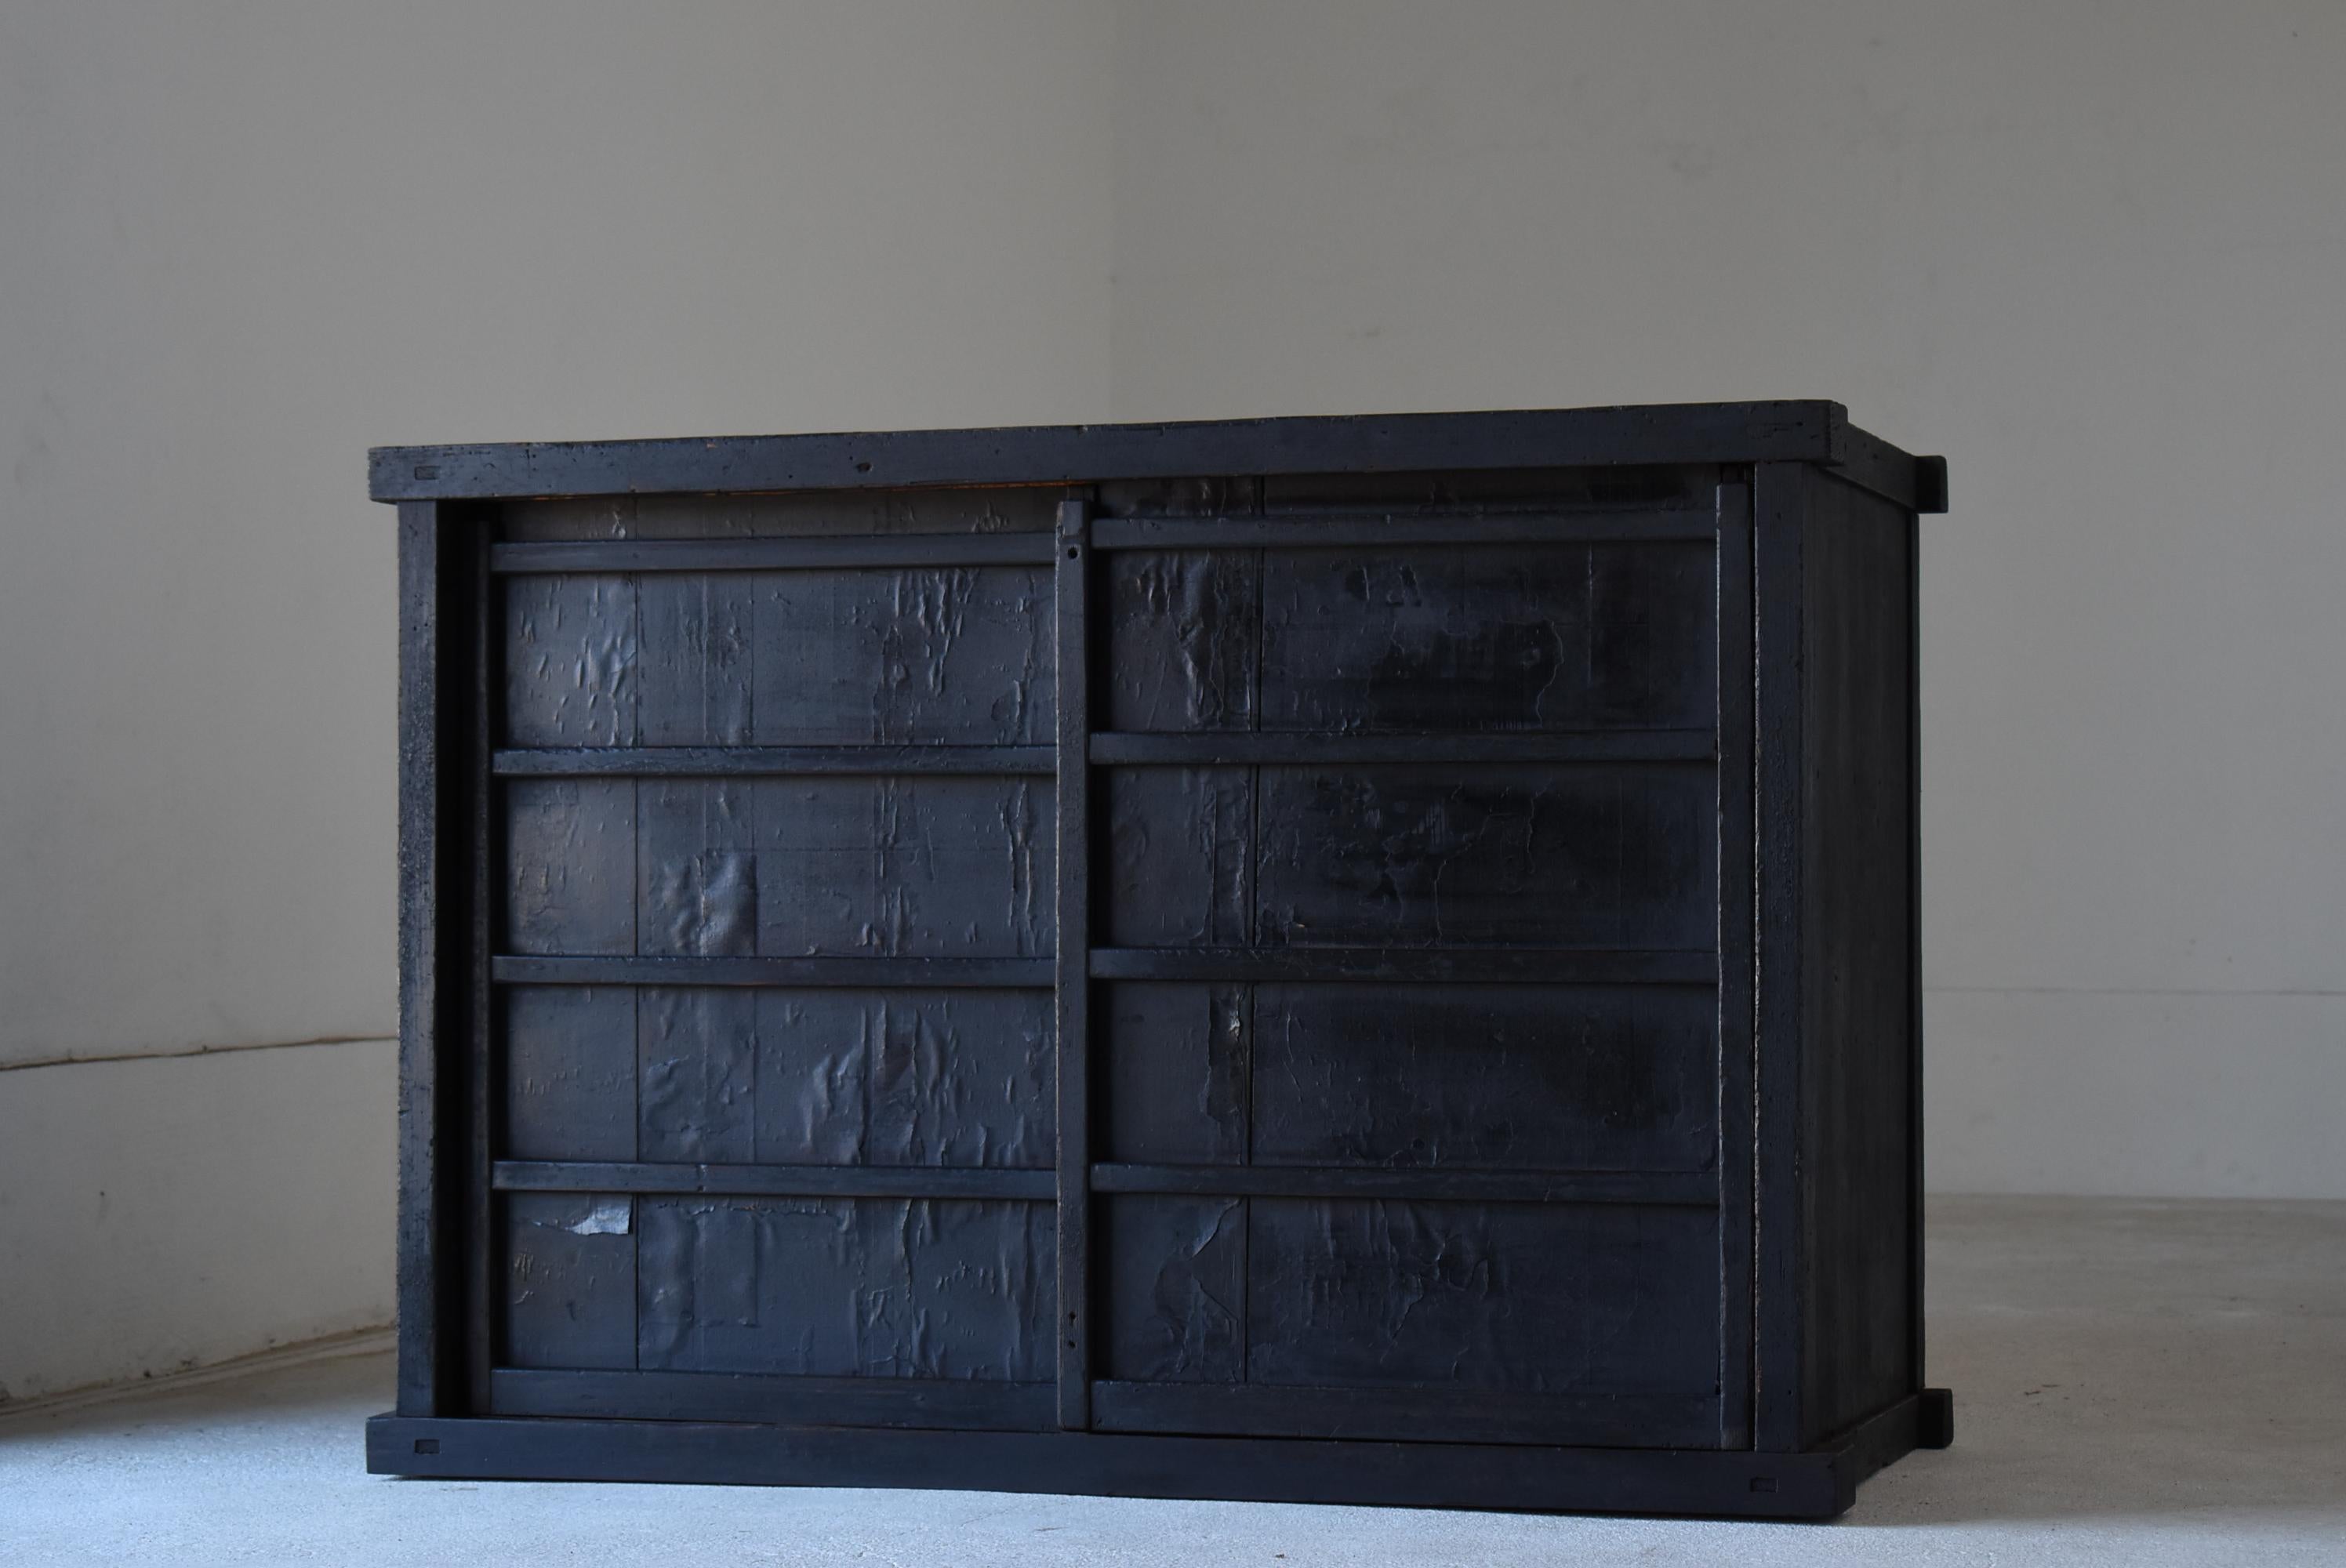 This is a very old Japanese tansu.
It is a piece of furniture from the Edo period. (1800s - 1860s)
It is made of cedar wood.
The doors seem to be covered with paper.
It is very rare.

Black chests like this one are not seen in Japan every